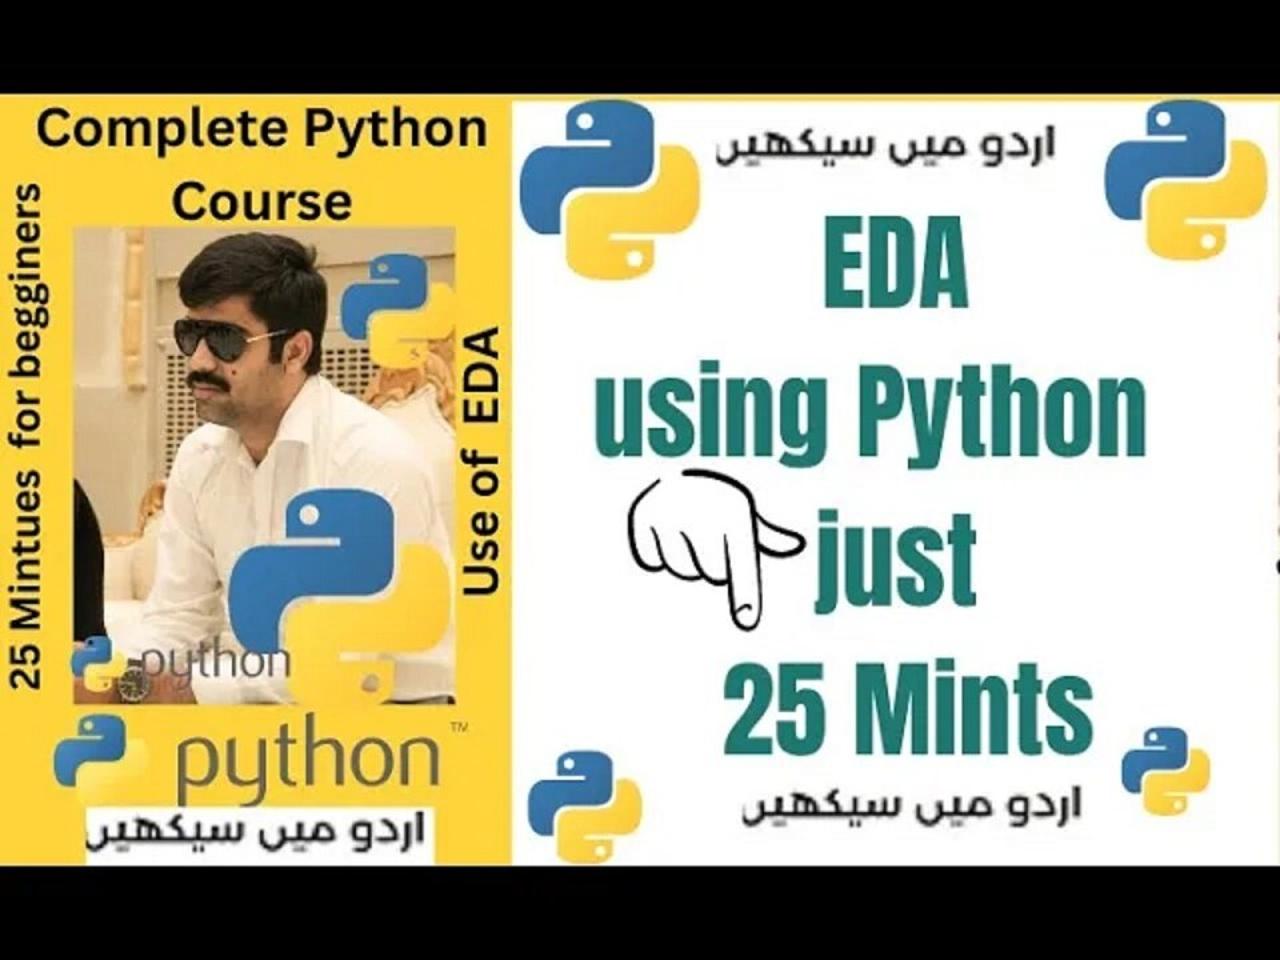 Exploratory Data Analysis with Complete Project in Python(EDA)|Beginners and Non-Coders|Data Science